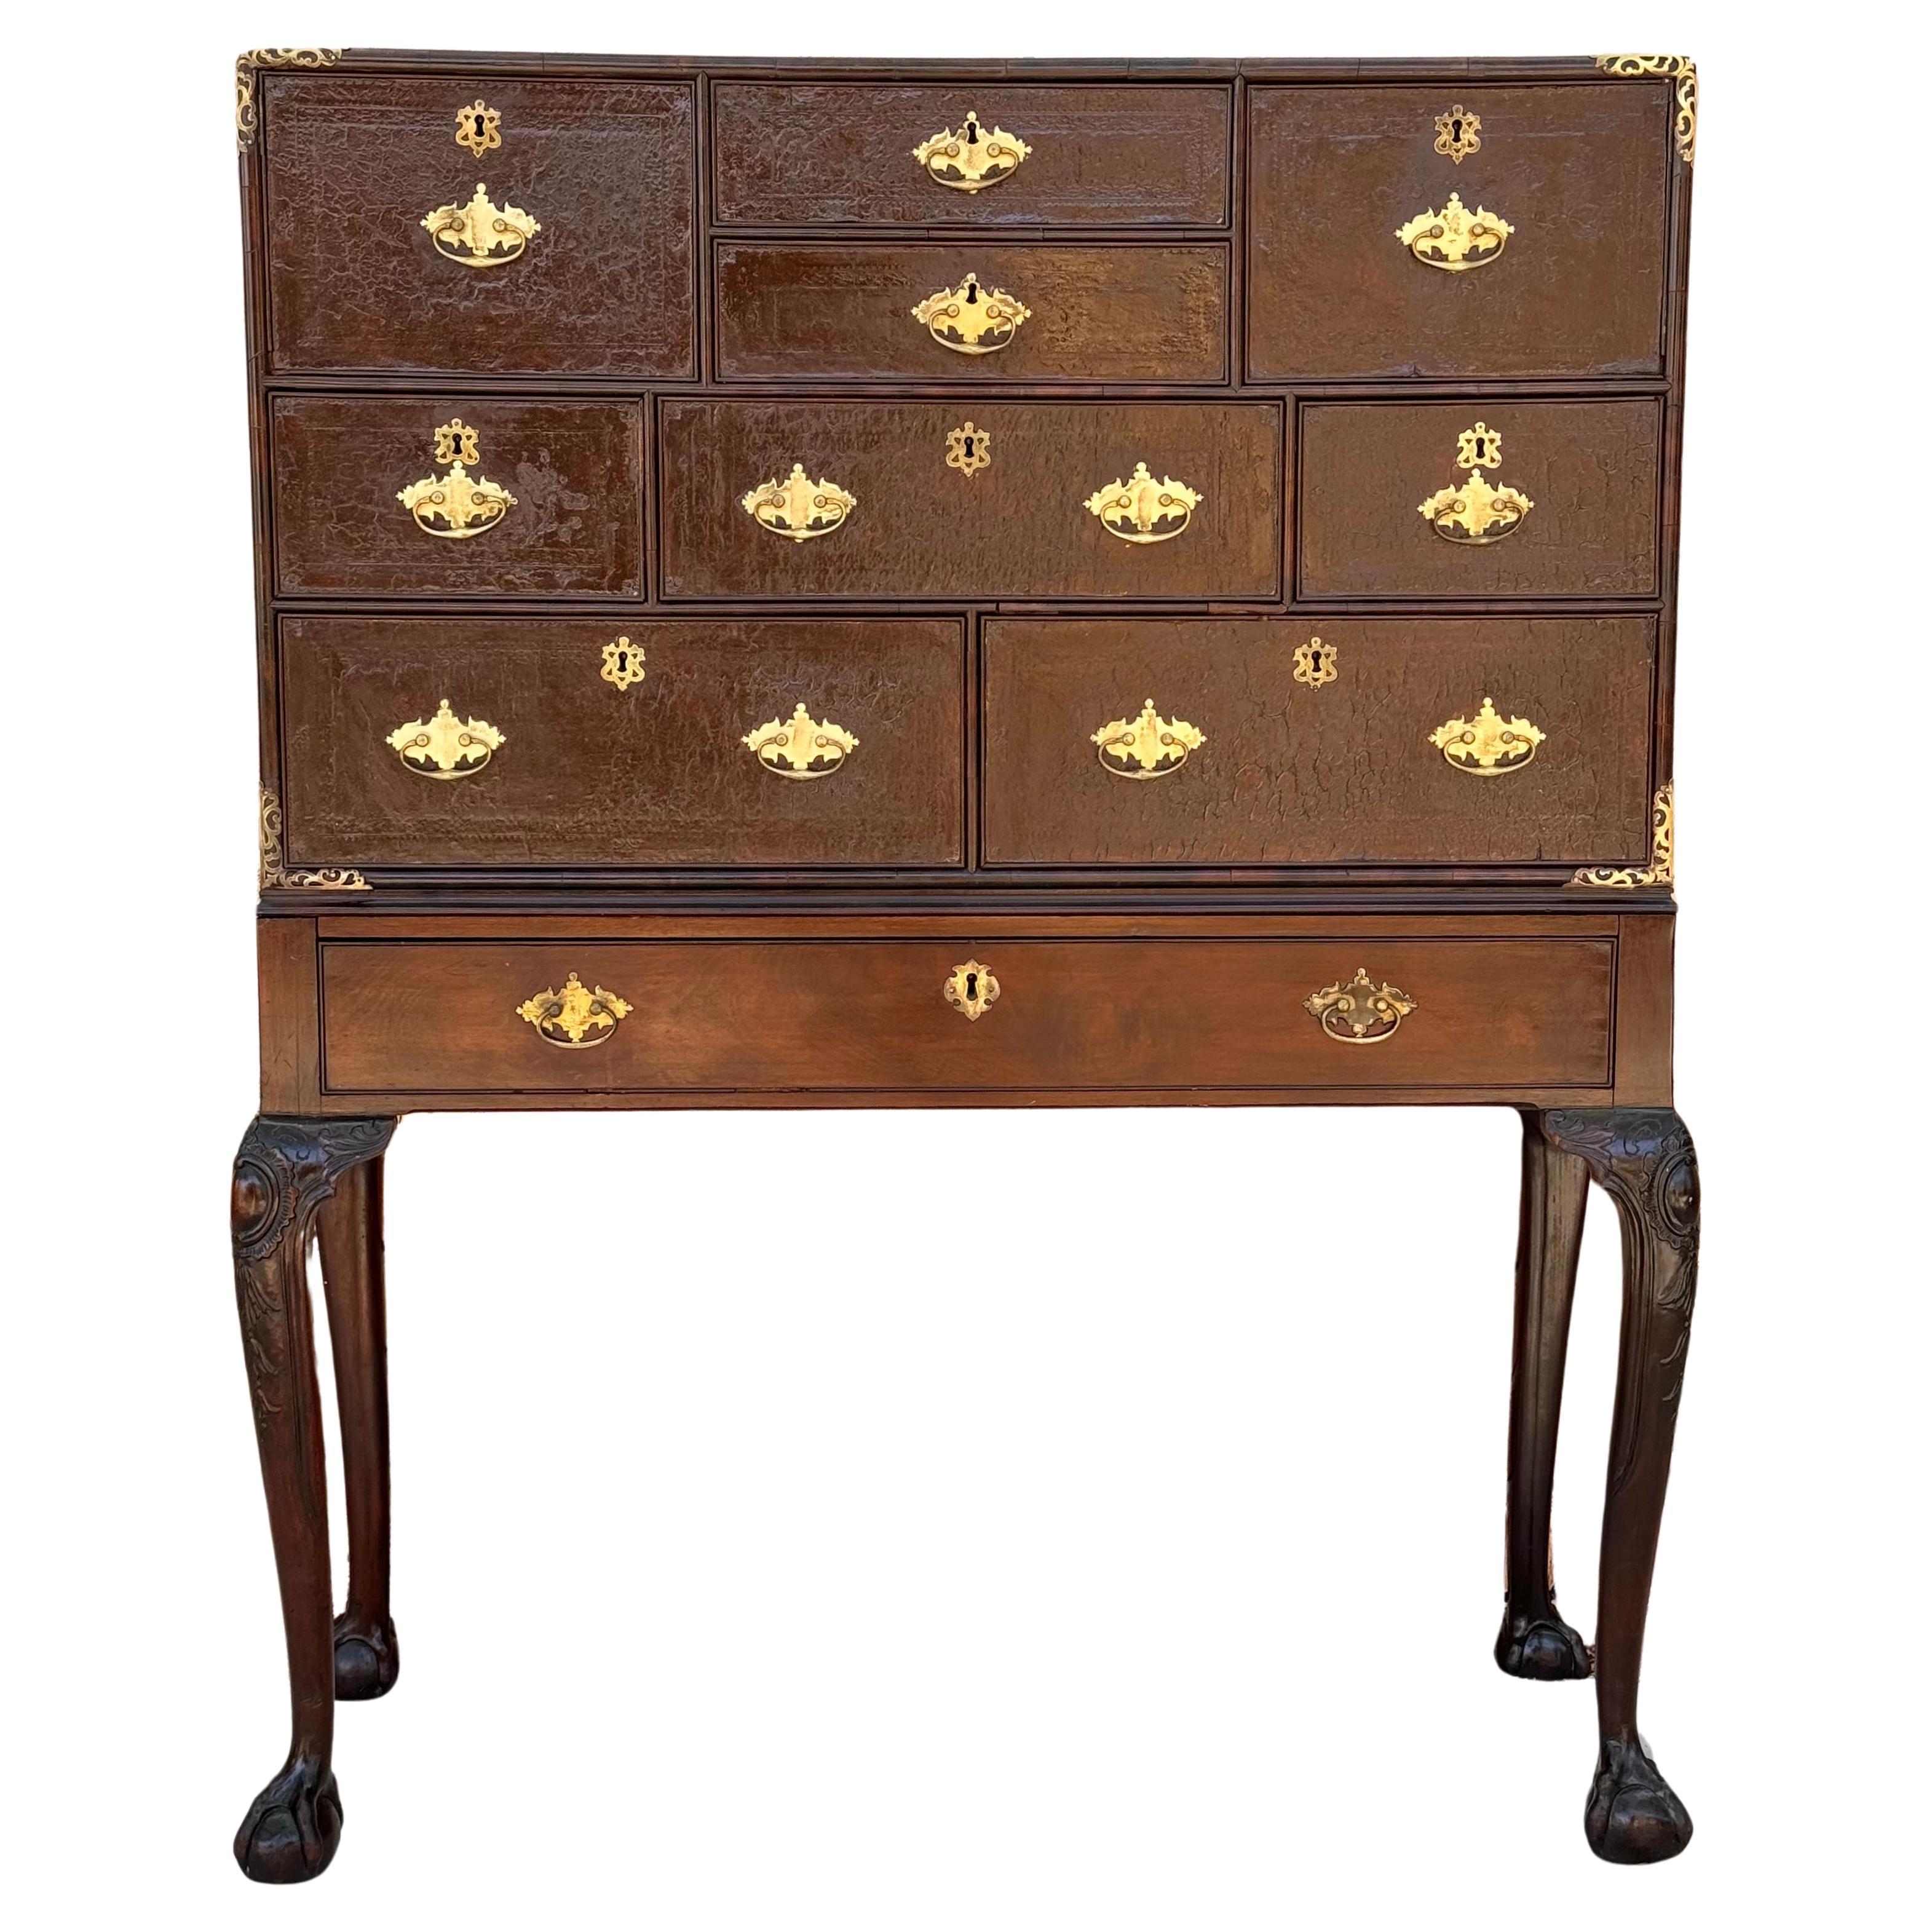 19th Century Campaign Desk Cabinet on Stand